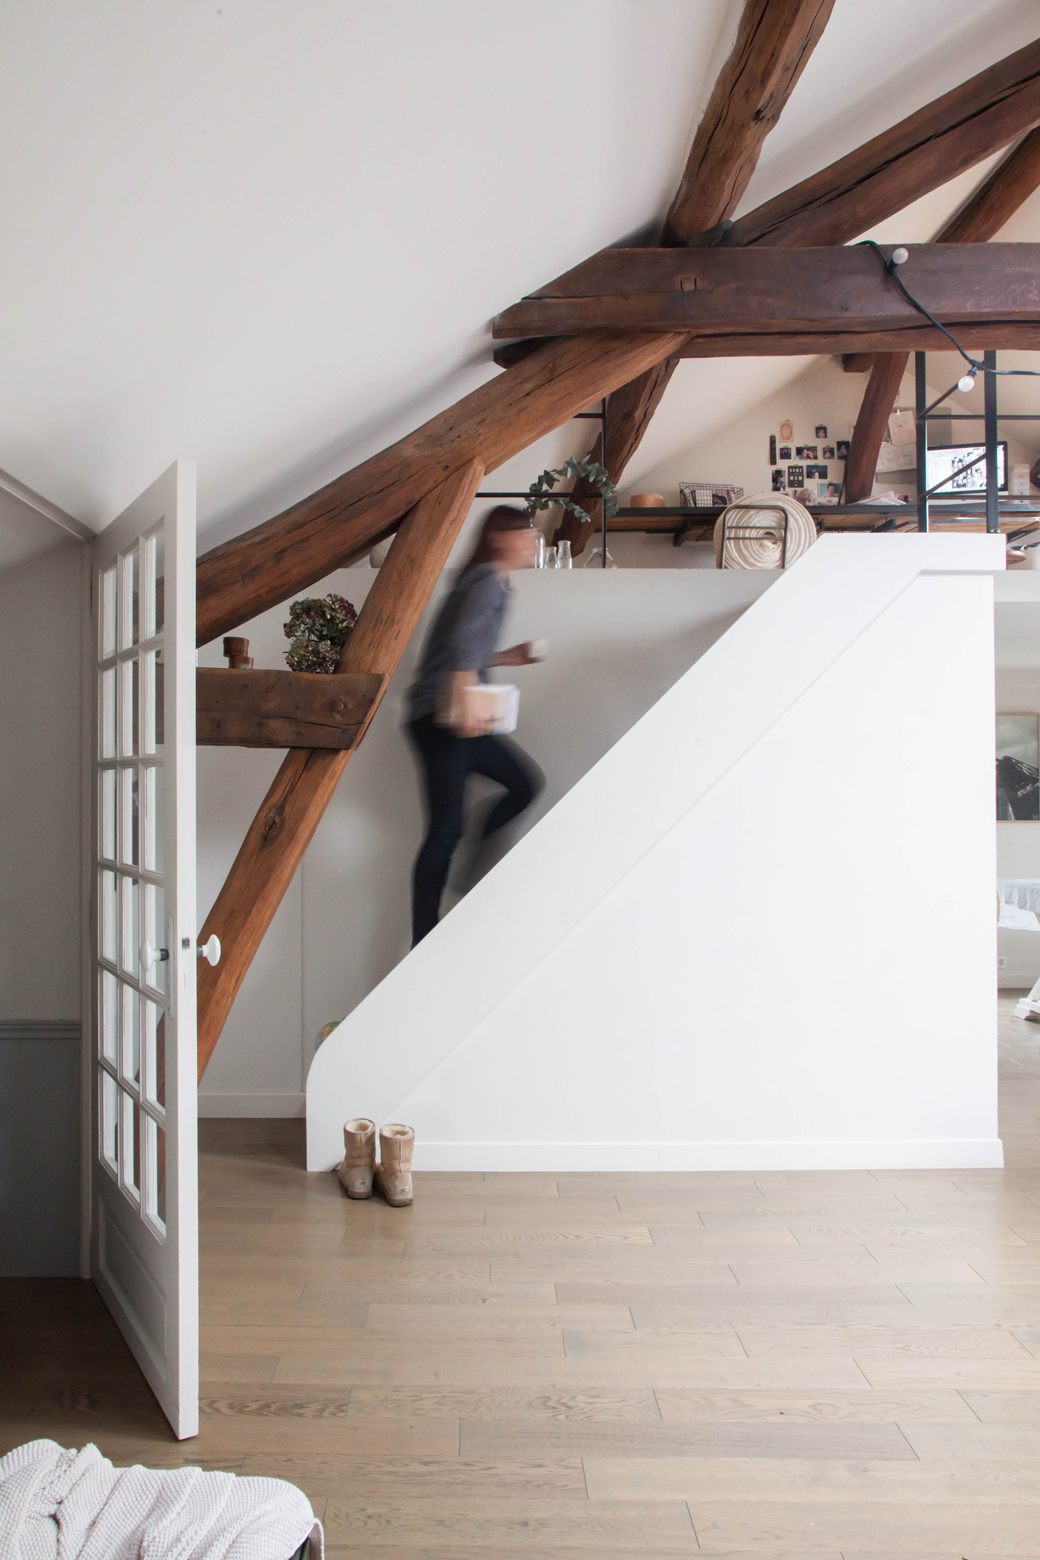 The white staircase is simple and modern